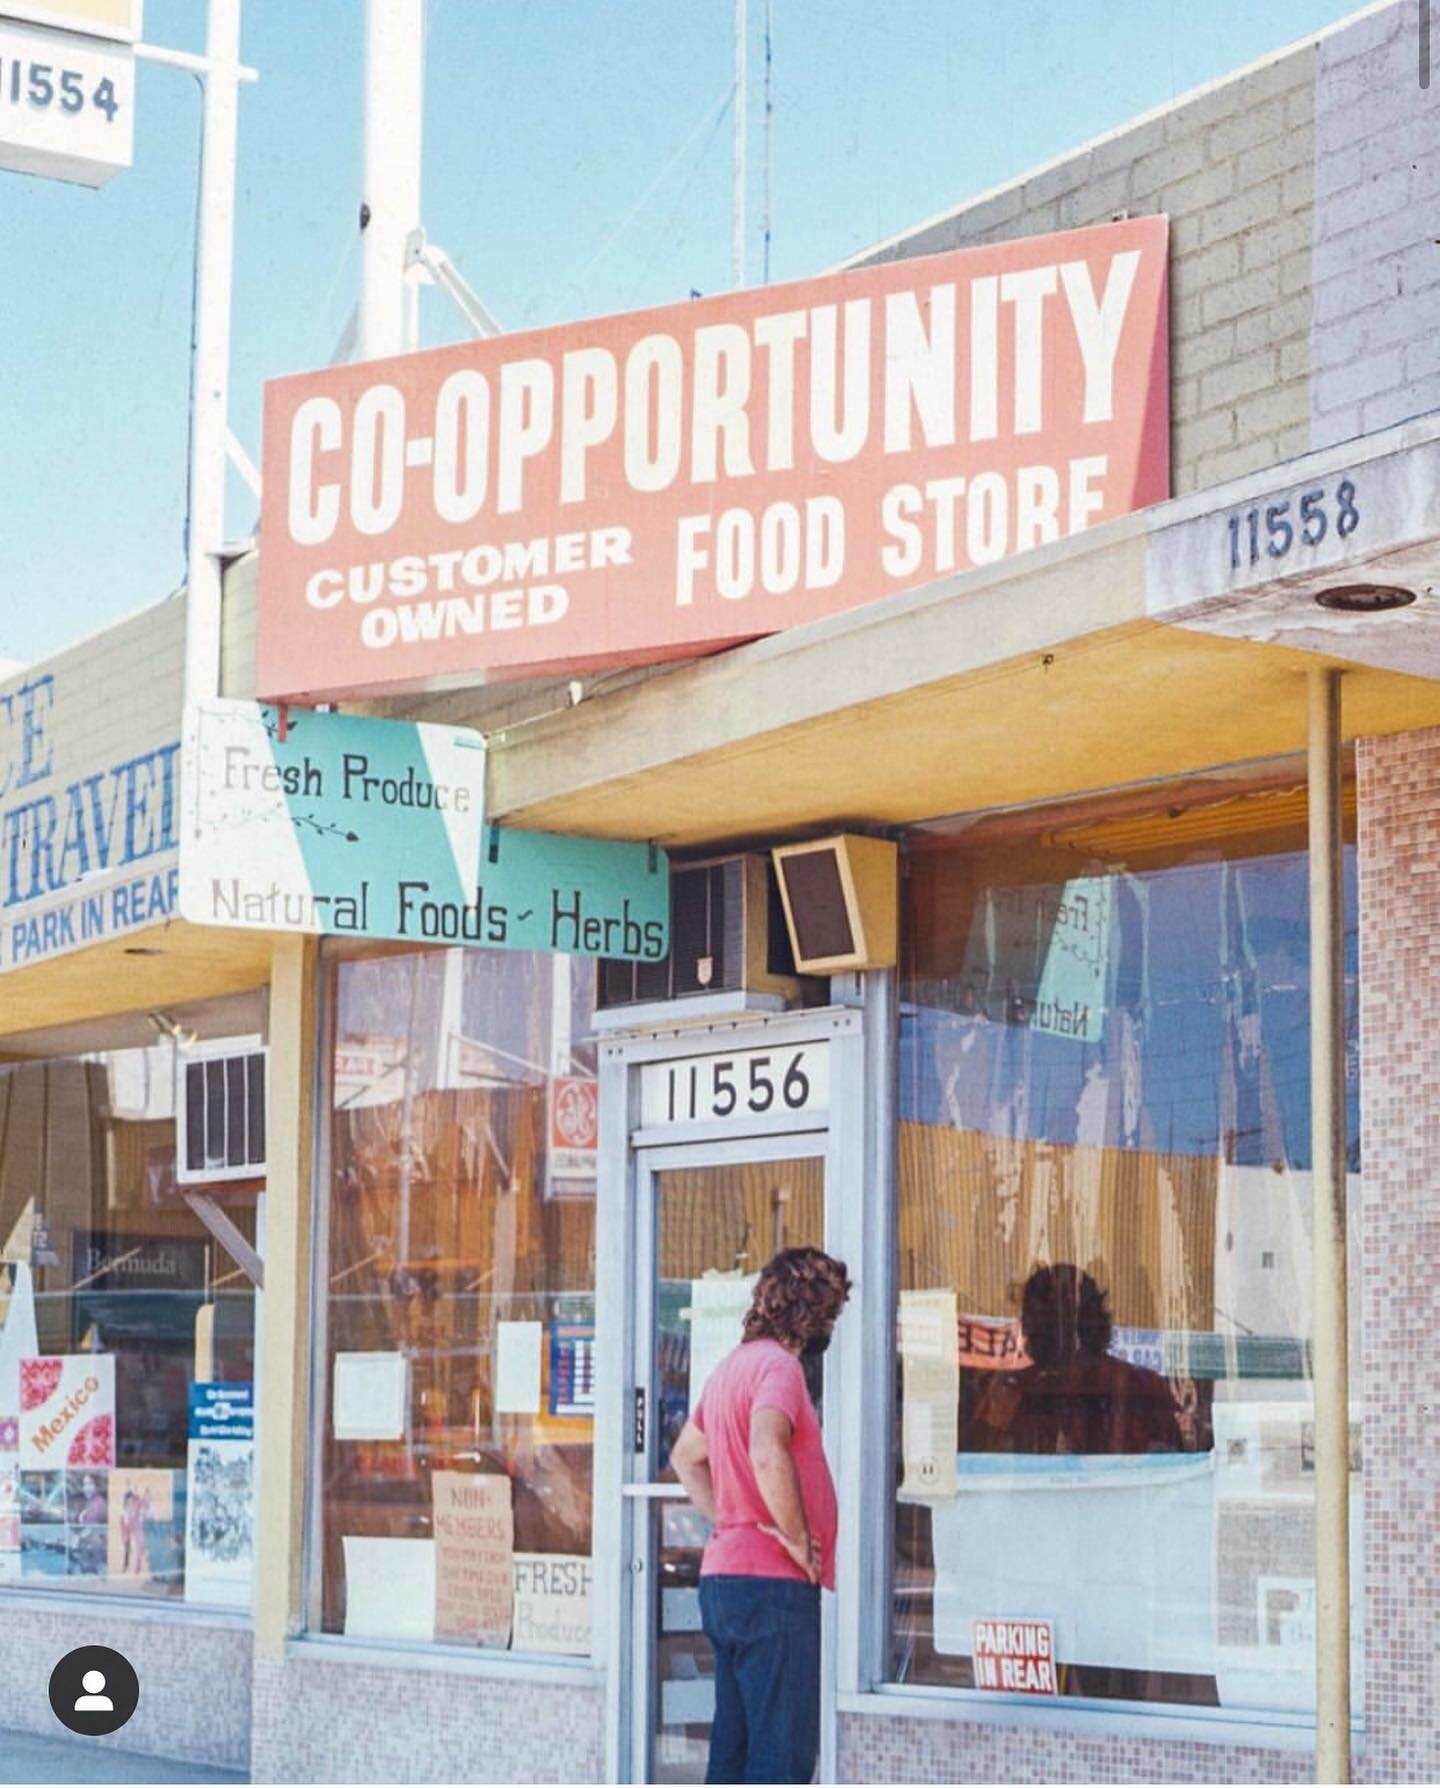 Super proud to say &ldquo;my market&rdquo; is 46 years old, non-corporate and customer-owned, fully organic, loving, kind and old-school. Happy Birthday @coopportunitymarket !! I&rsquo;m grateful for your existence.
💖🙏🍓🥑🍑💖
#santamonica #organic